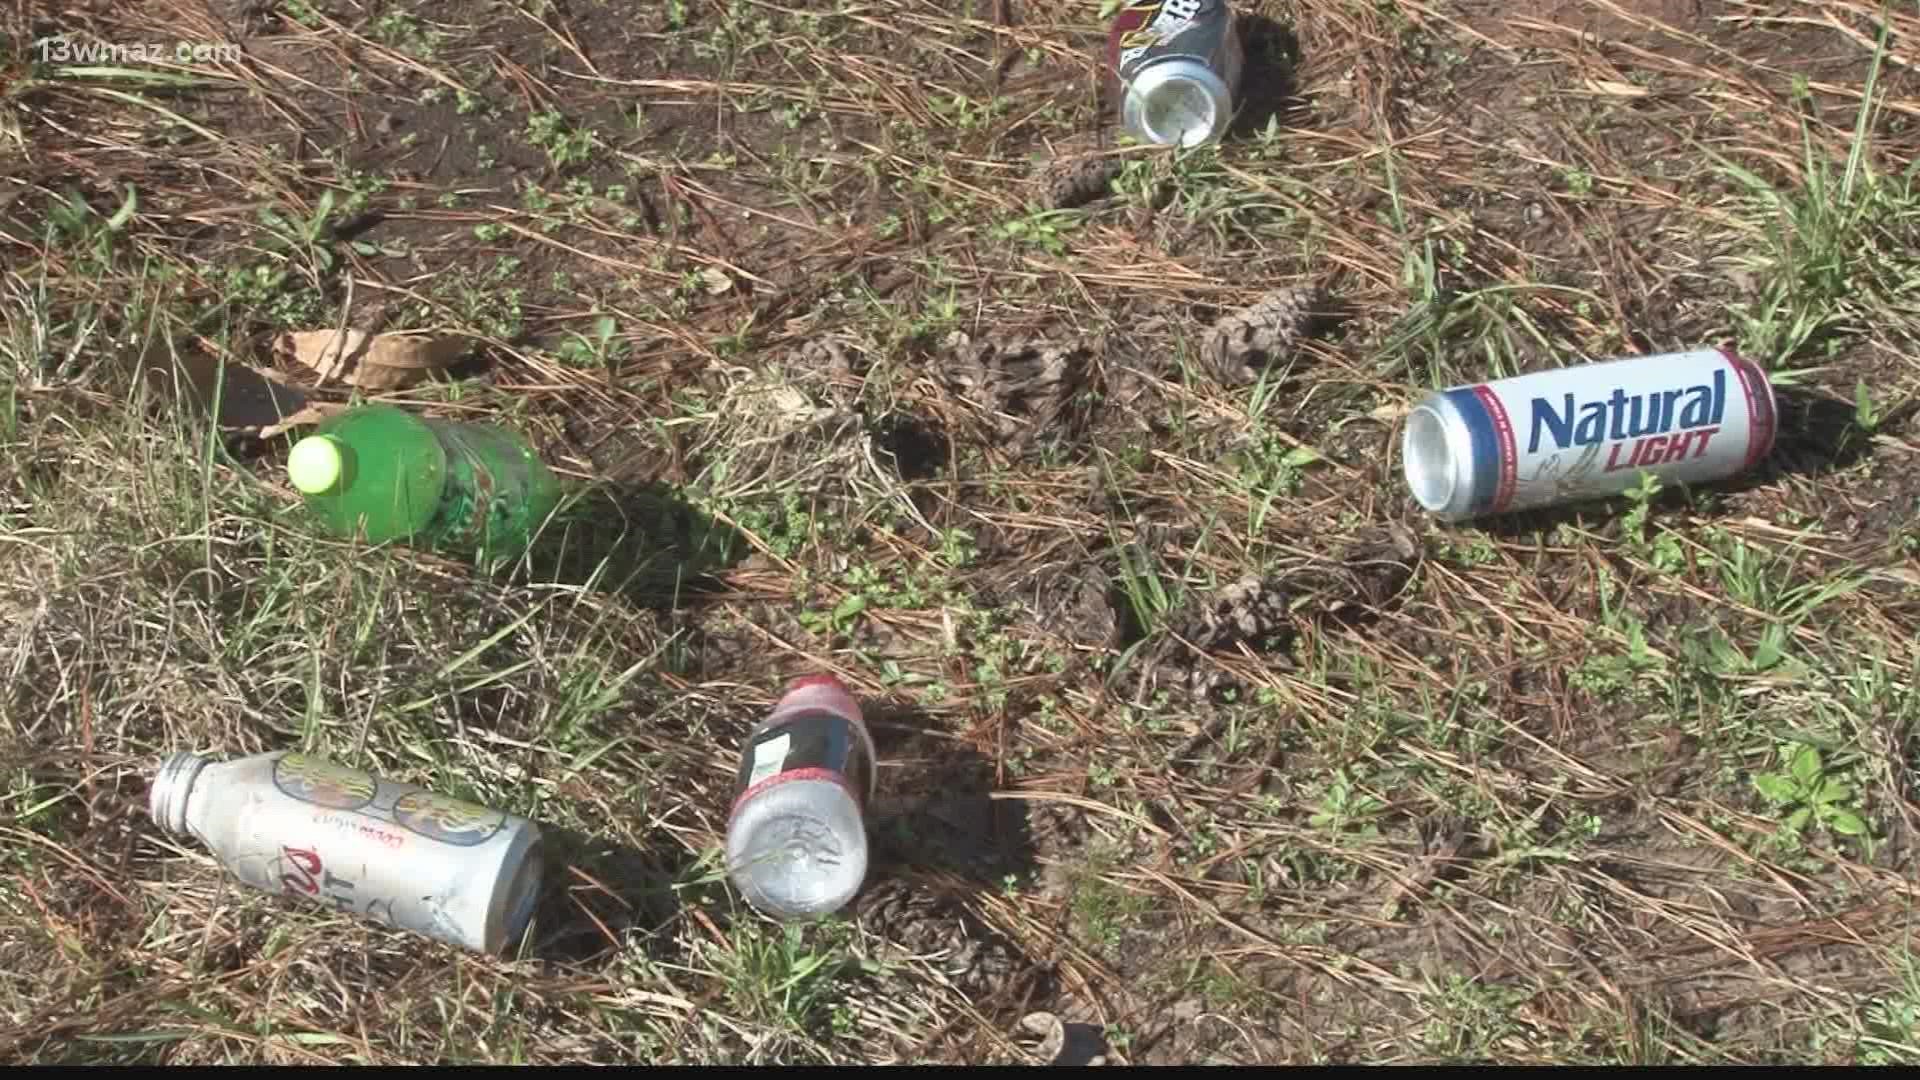 People living in a north Houston County neighborhood don't like the way things look right now. They're frustrated over what they call a big litter problem.